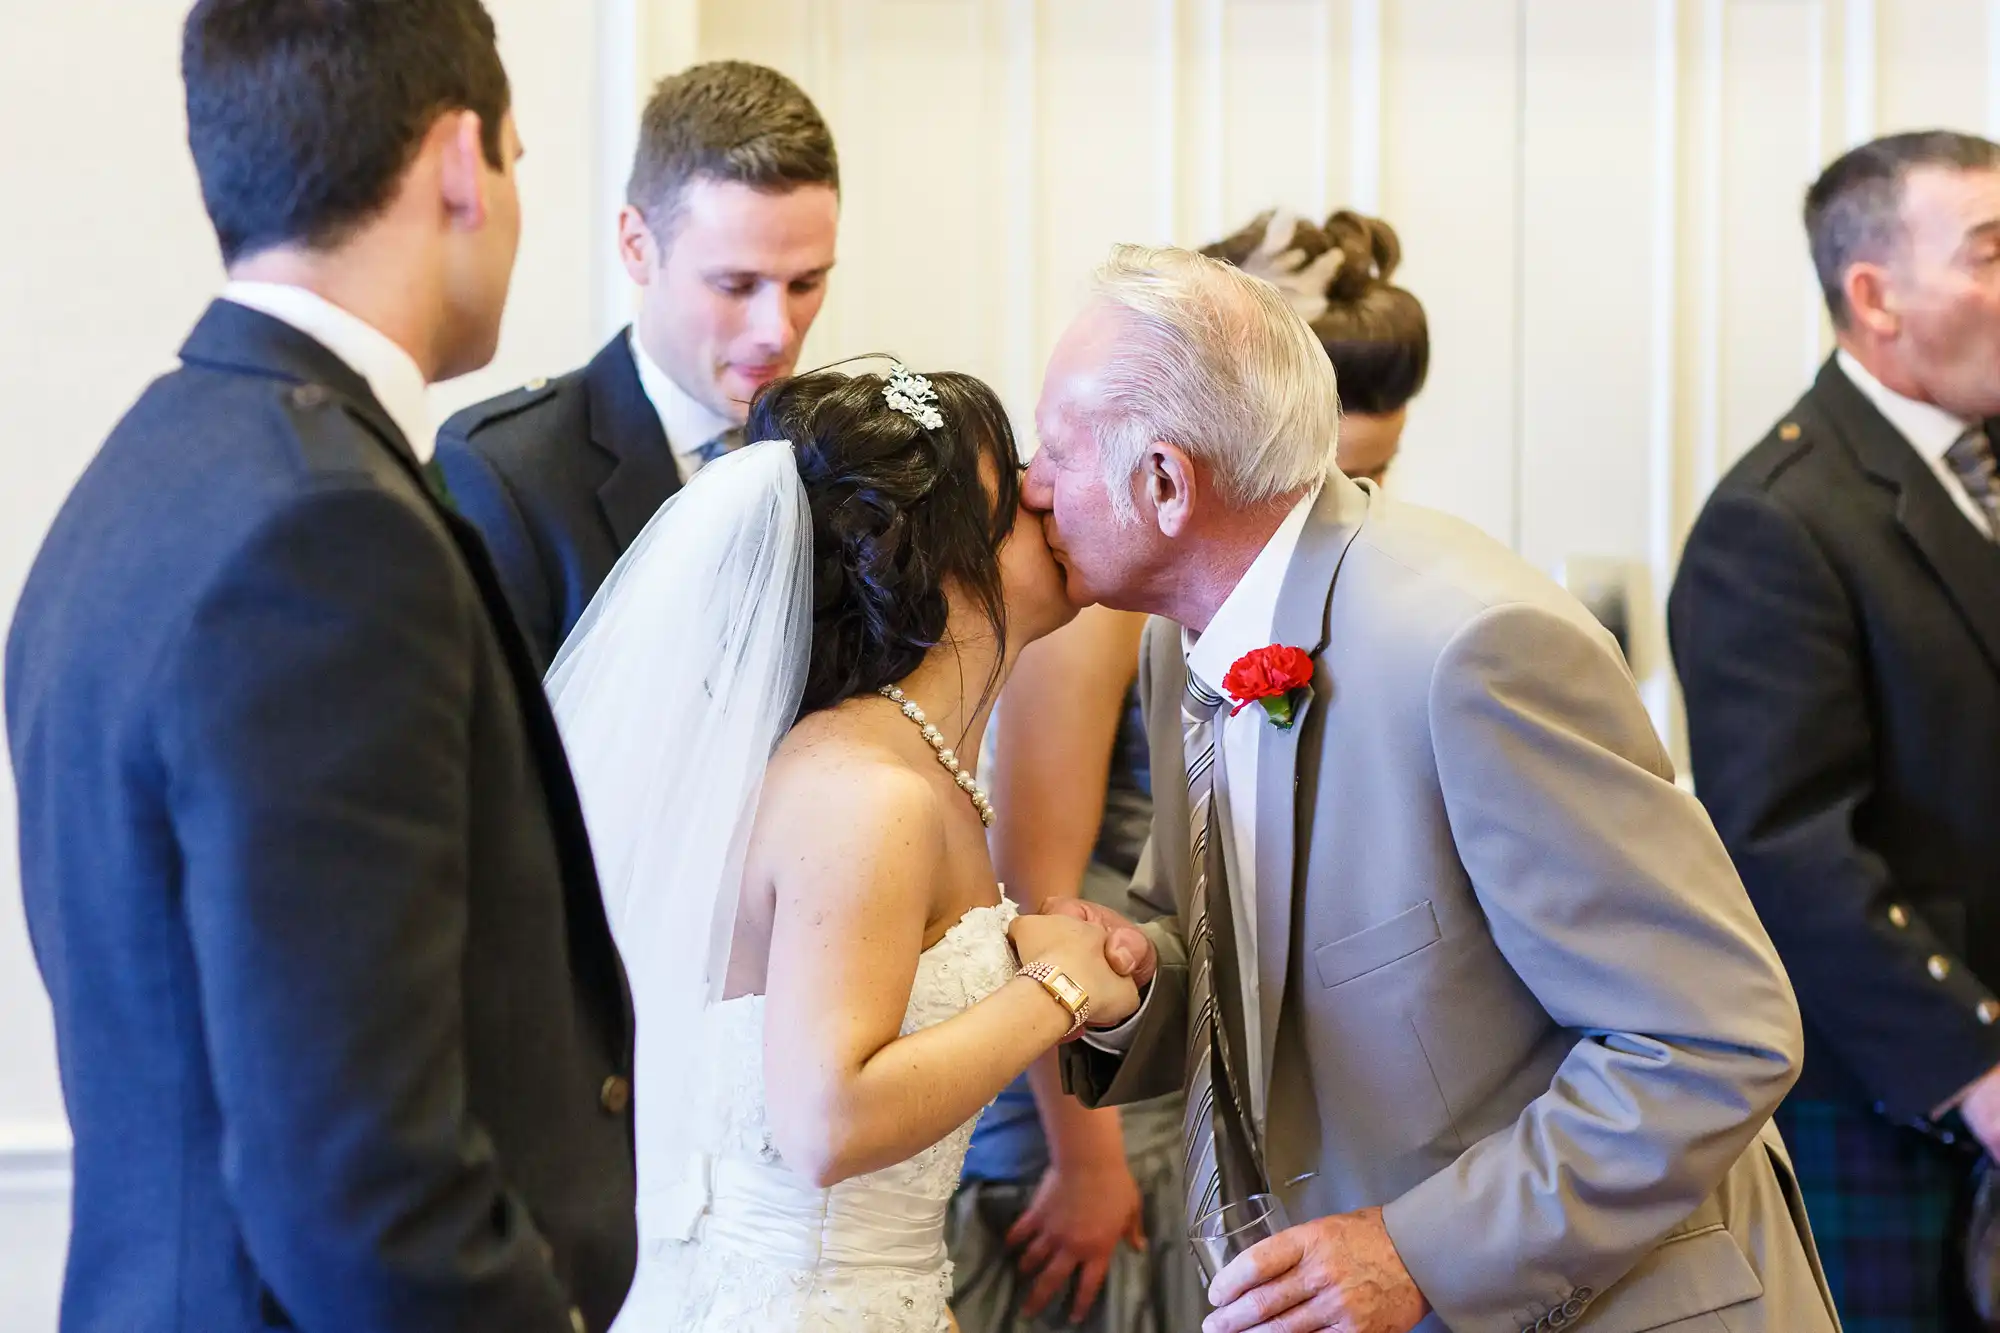 Elderly man kissing the bride on the cheek at a wedding reception, surrounded by guests in formal attire.